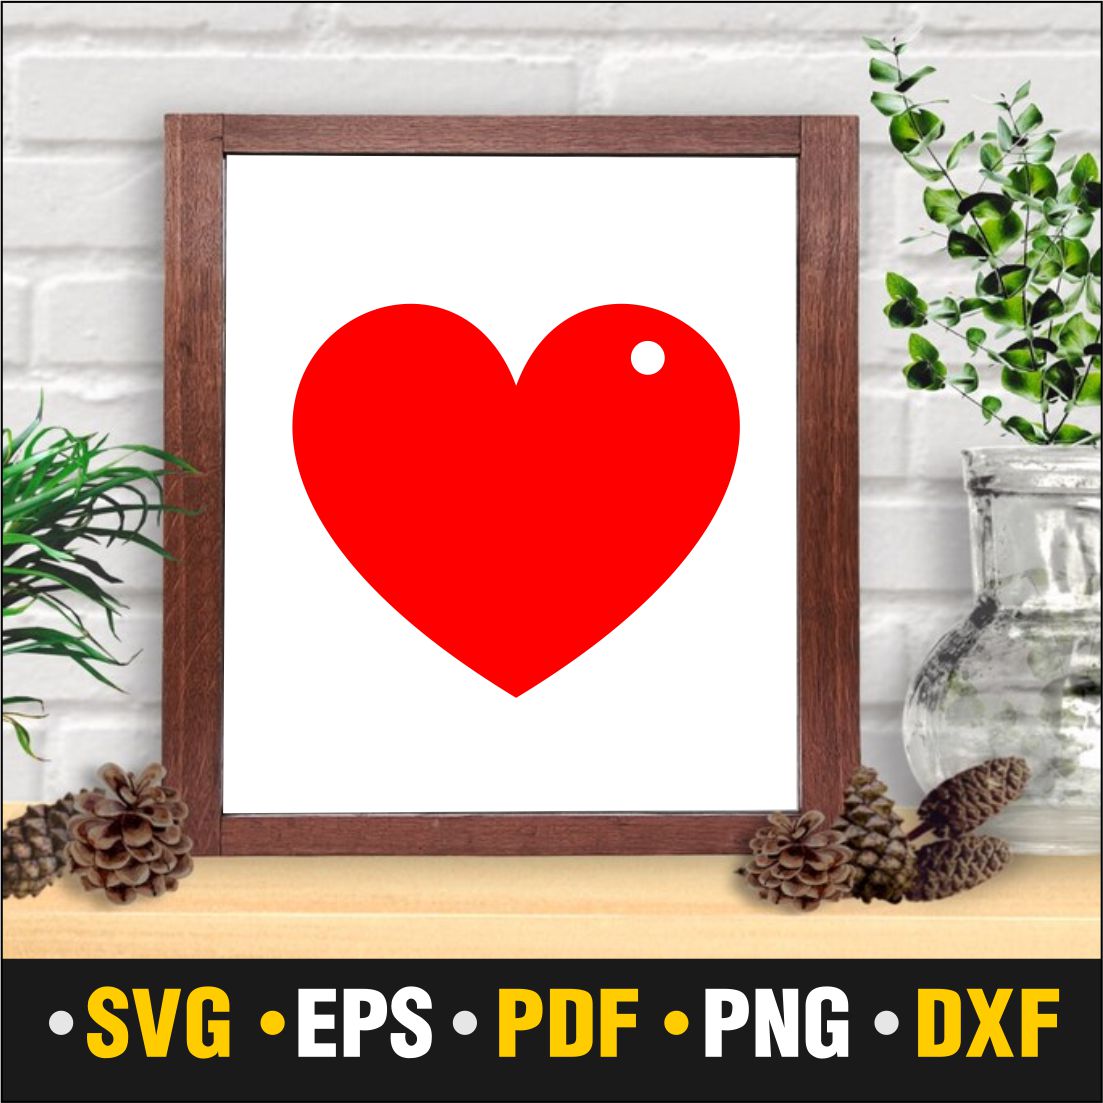 Gift Tags SVG, PDF, PNG, DXF, EPS cover image.